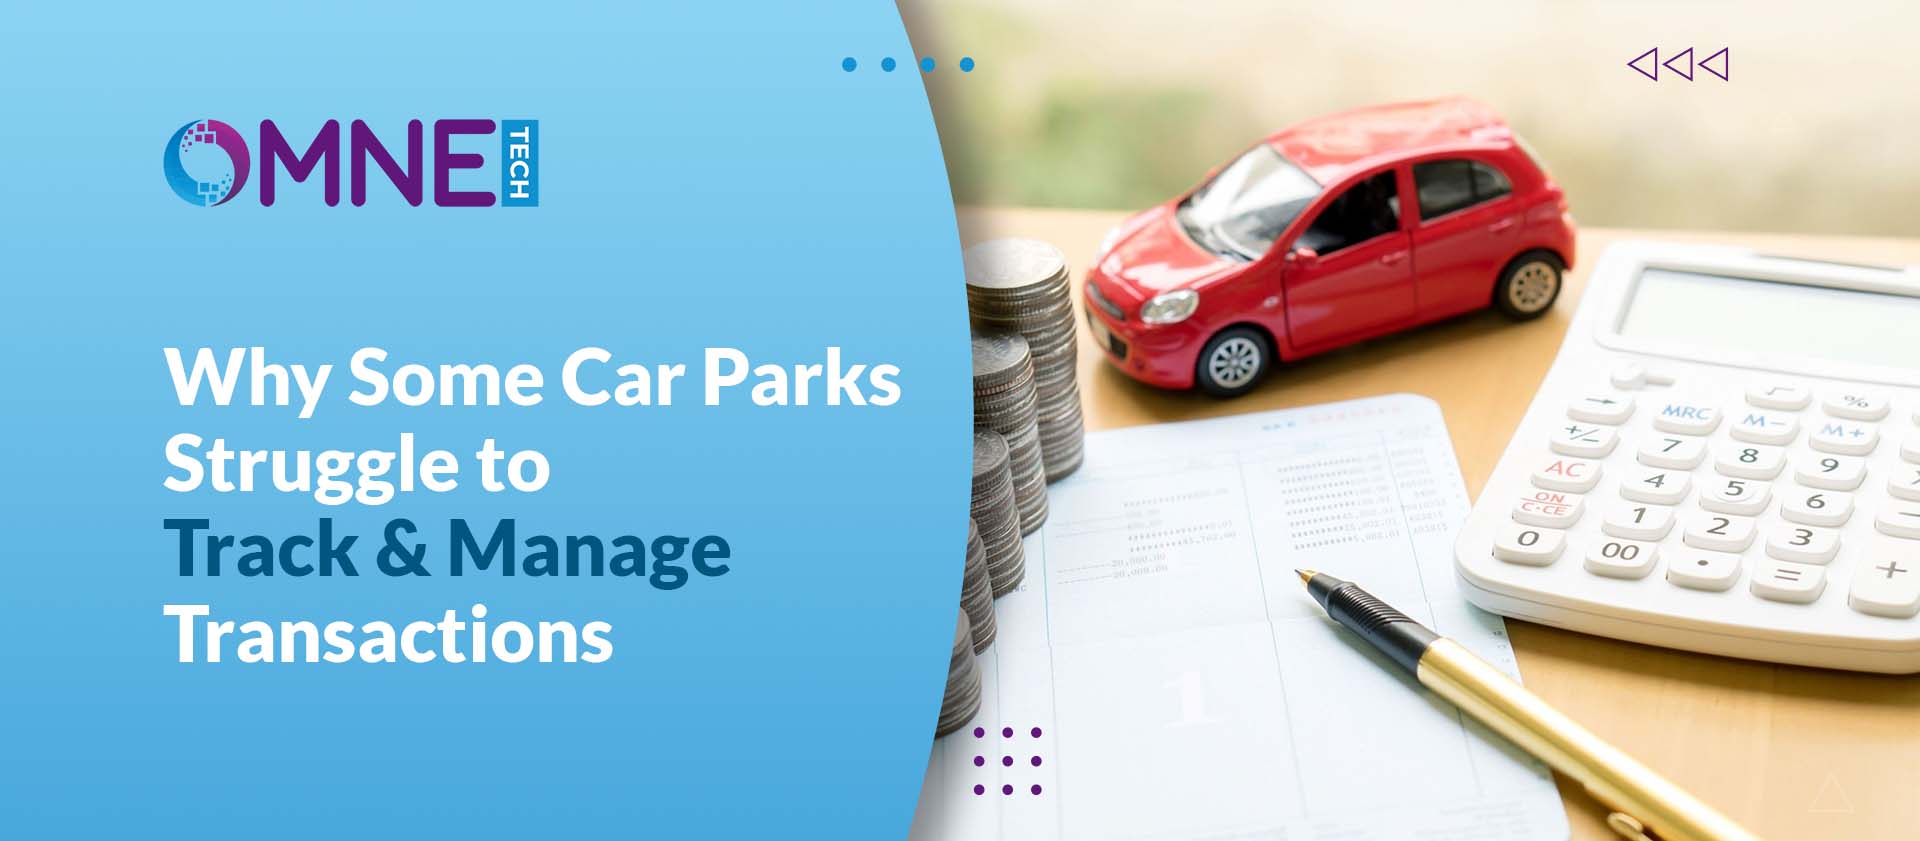 Why Some Car Parks Struggle to Track & Manage Transactions
